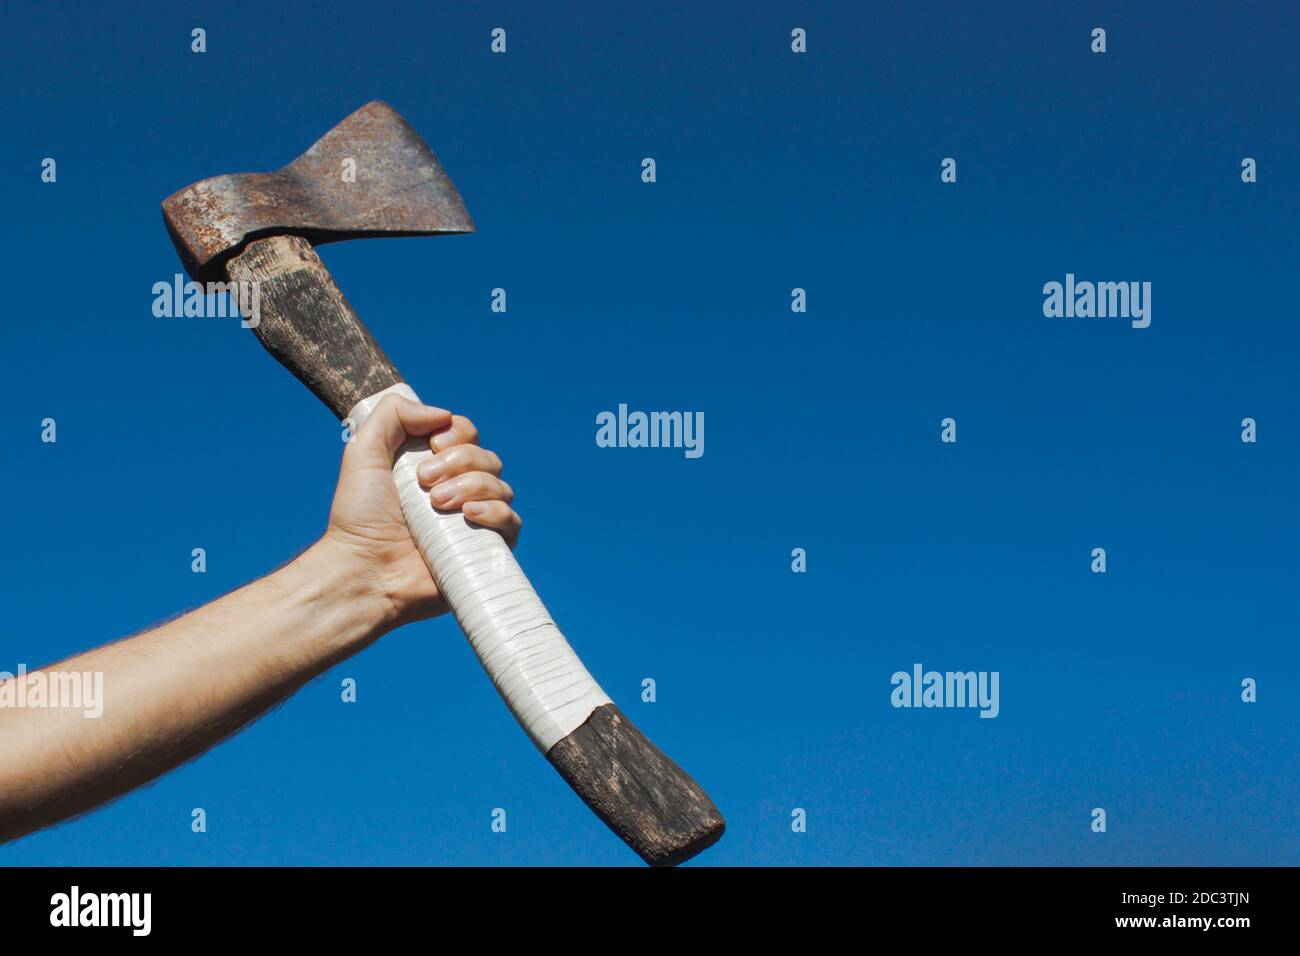 A European man hand tightens a white handle of an old ax with the sky on the background. Concept of strength, revolution and freedom Stock Photo